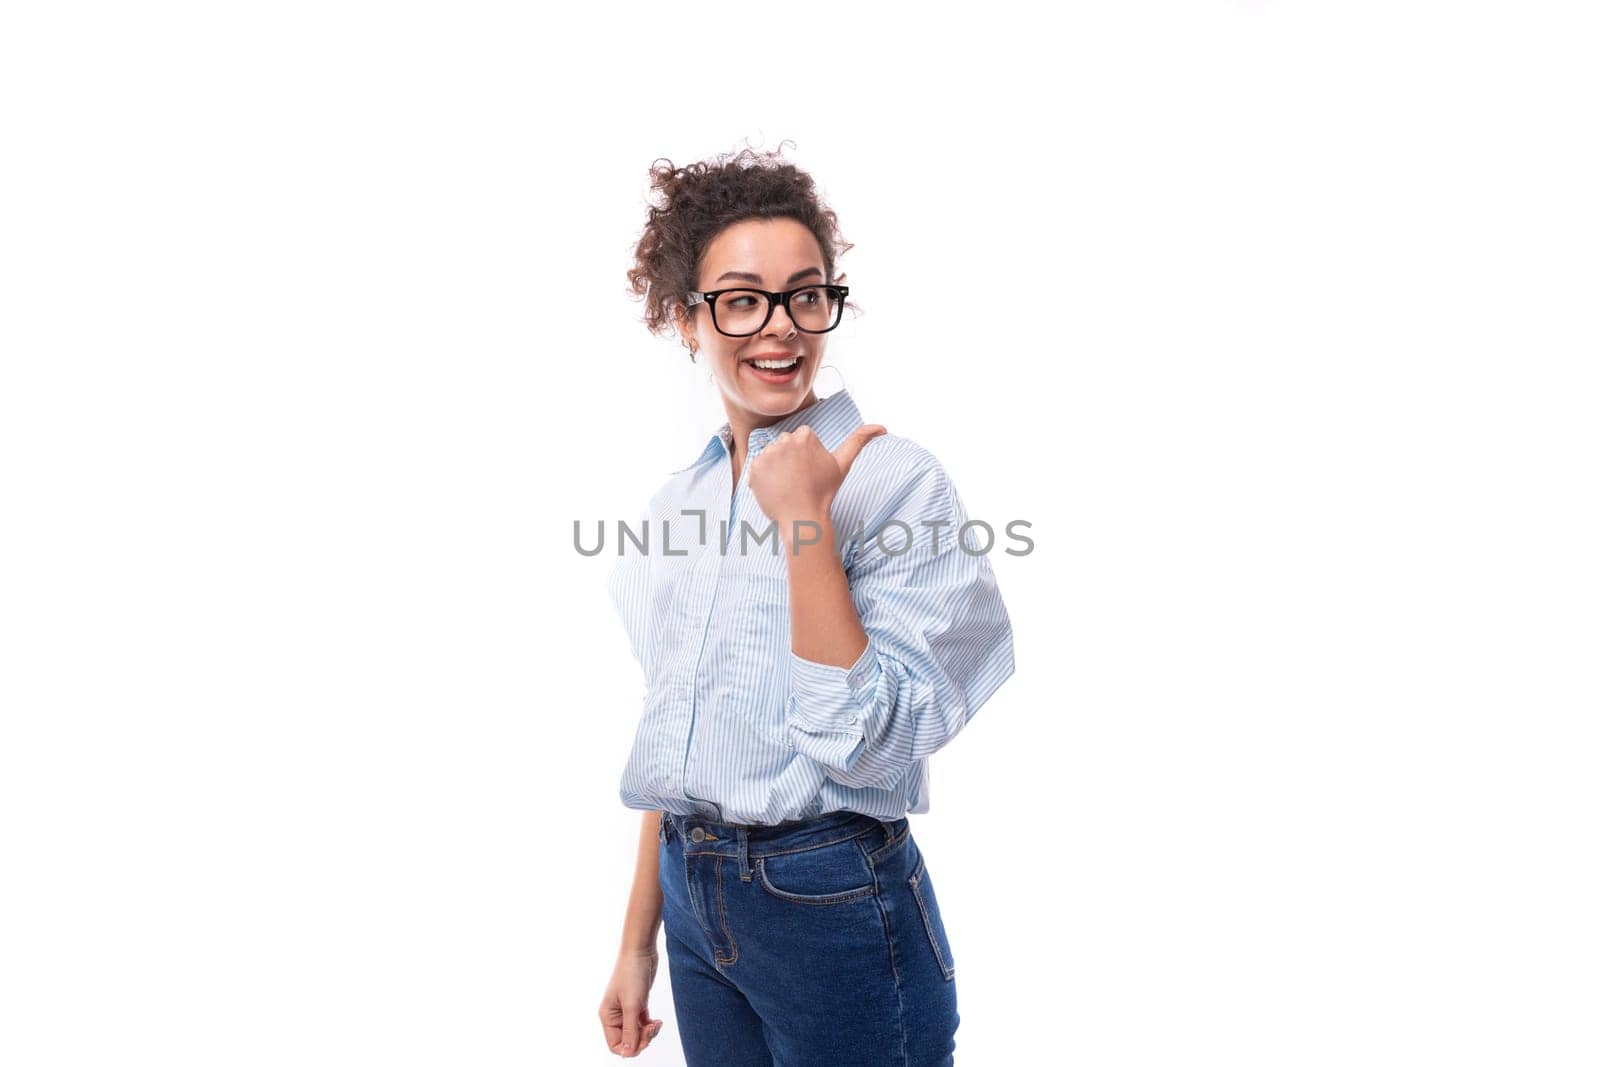 portrait of a young smiling fashionista caucasian woman working in the office who puts on glasses and a light blue shirt.